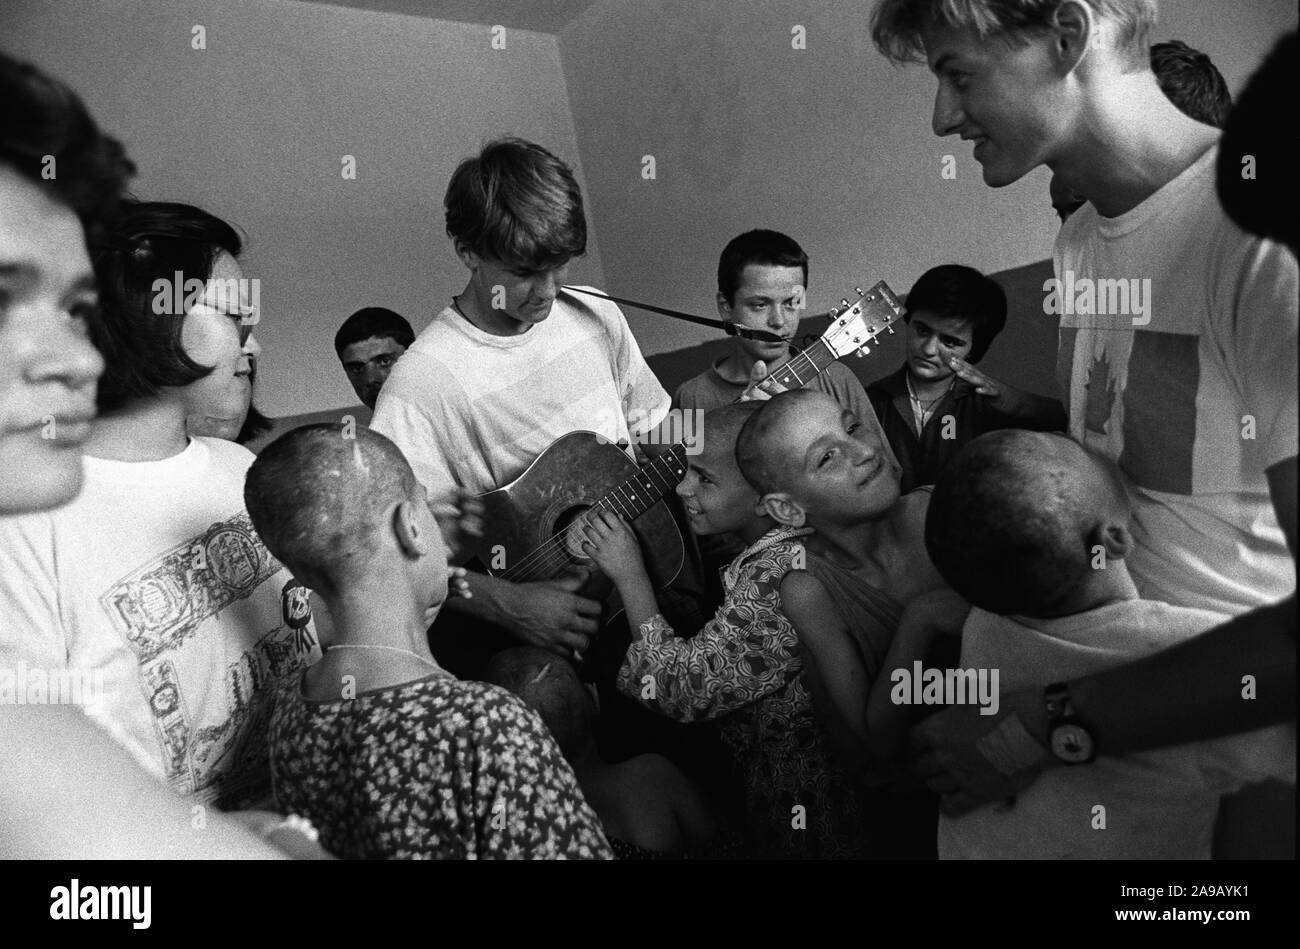 Hospital for mentally and physically handicapped children, with religious Westerners singing to them about Jesus, Shkodra, Albania, 1992. Stock Photo